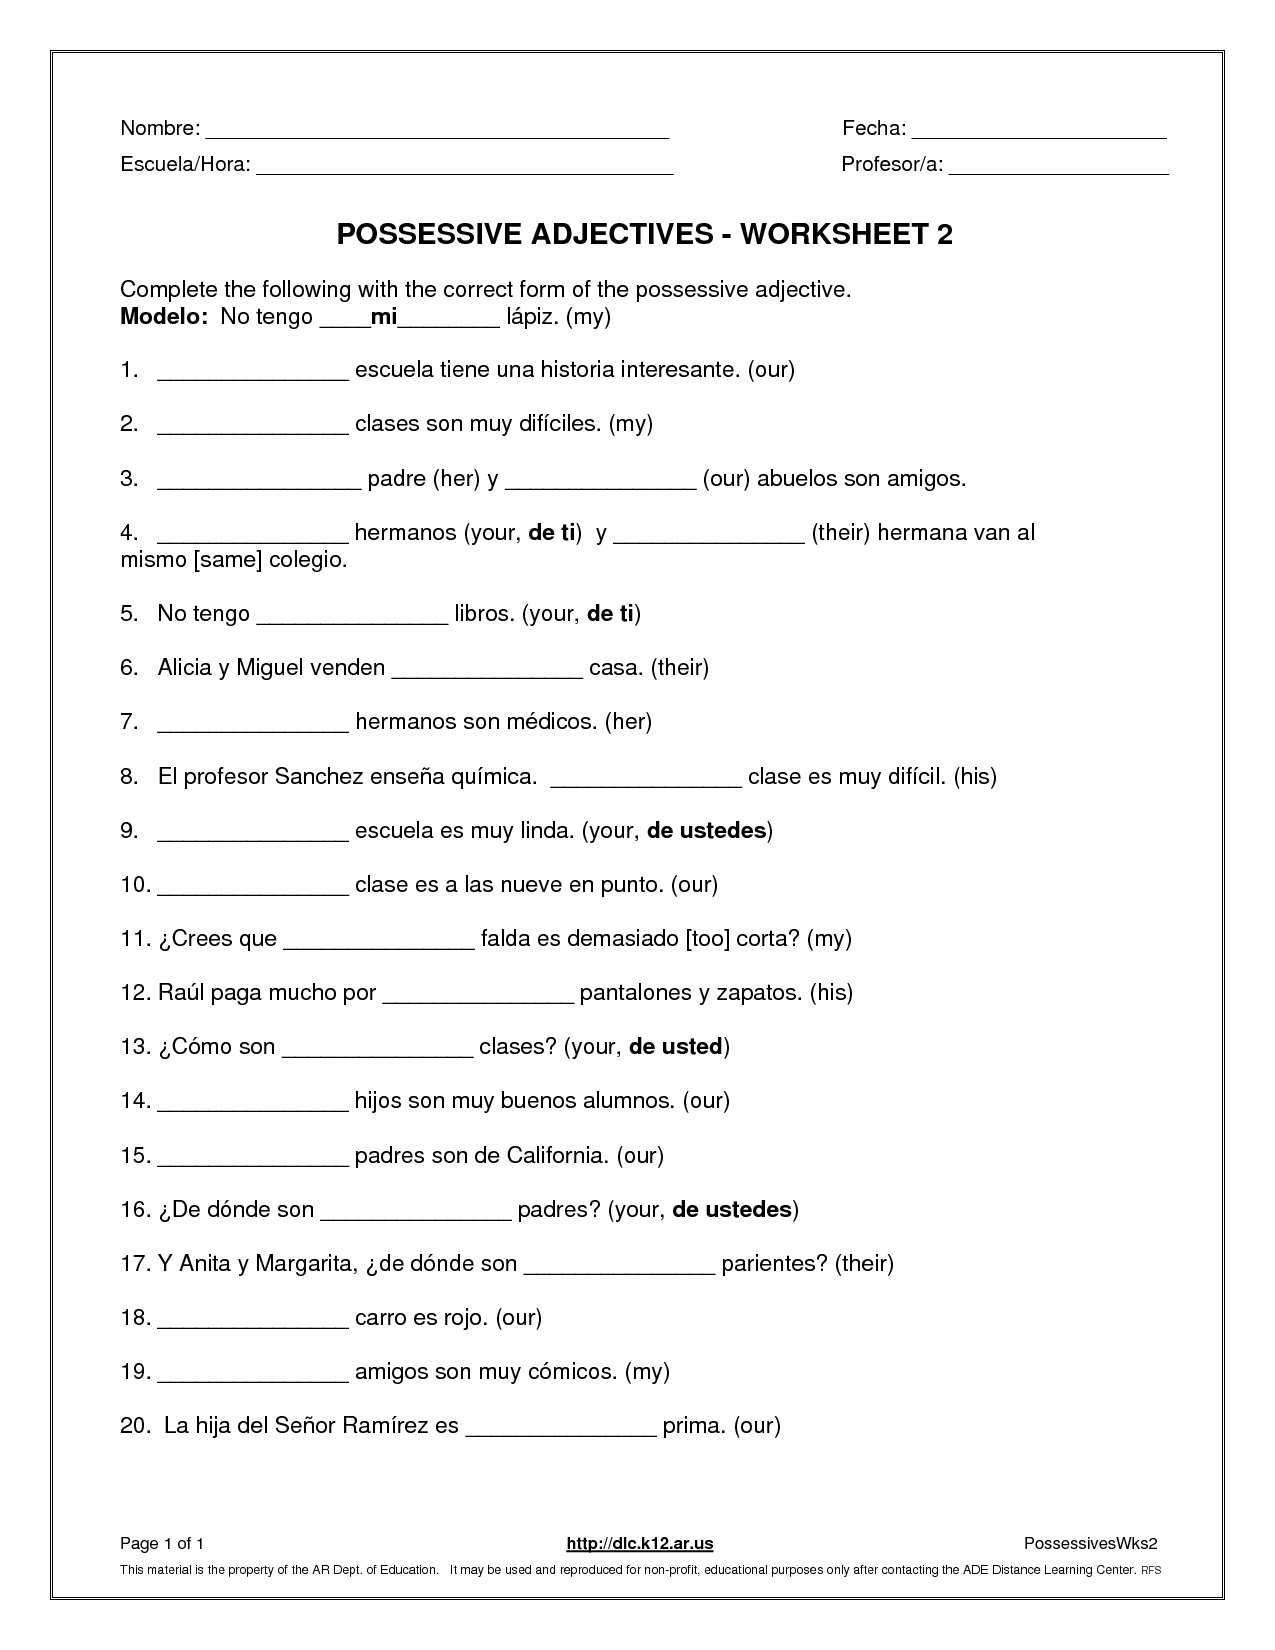 Agreement Of Adjectives Spanish Worksheet Answers 108625 Realidades | Printable Spanish Worksheets Answers